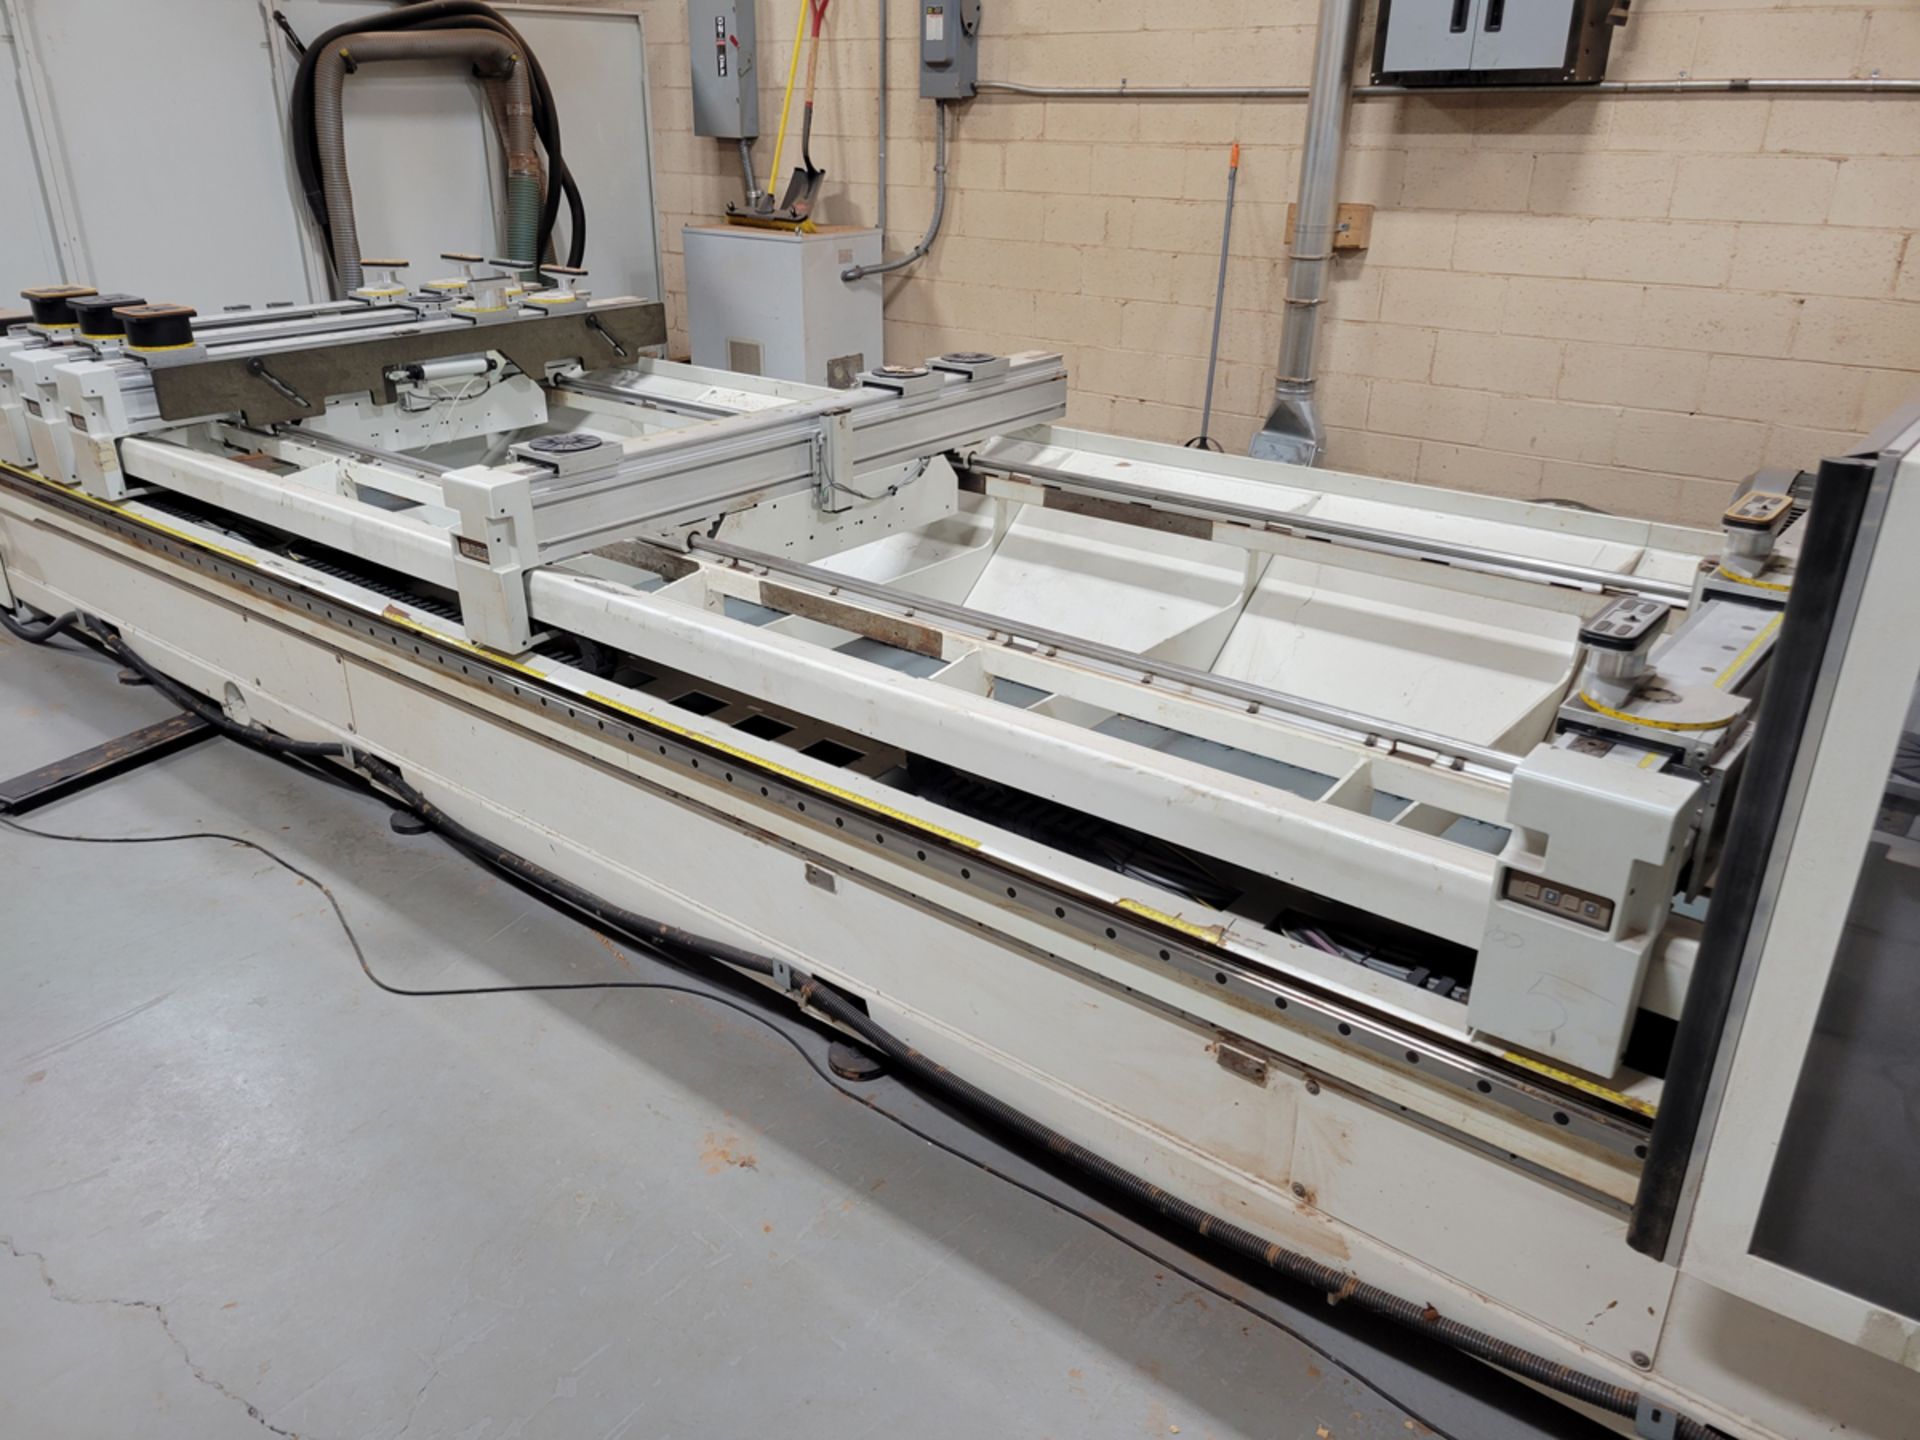 Routech Accord 30 FX CNC Machine for Routing/Drilling - Image 6 of 35